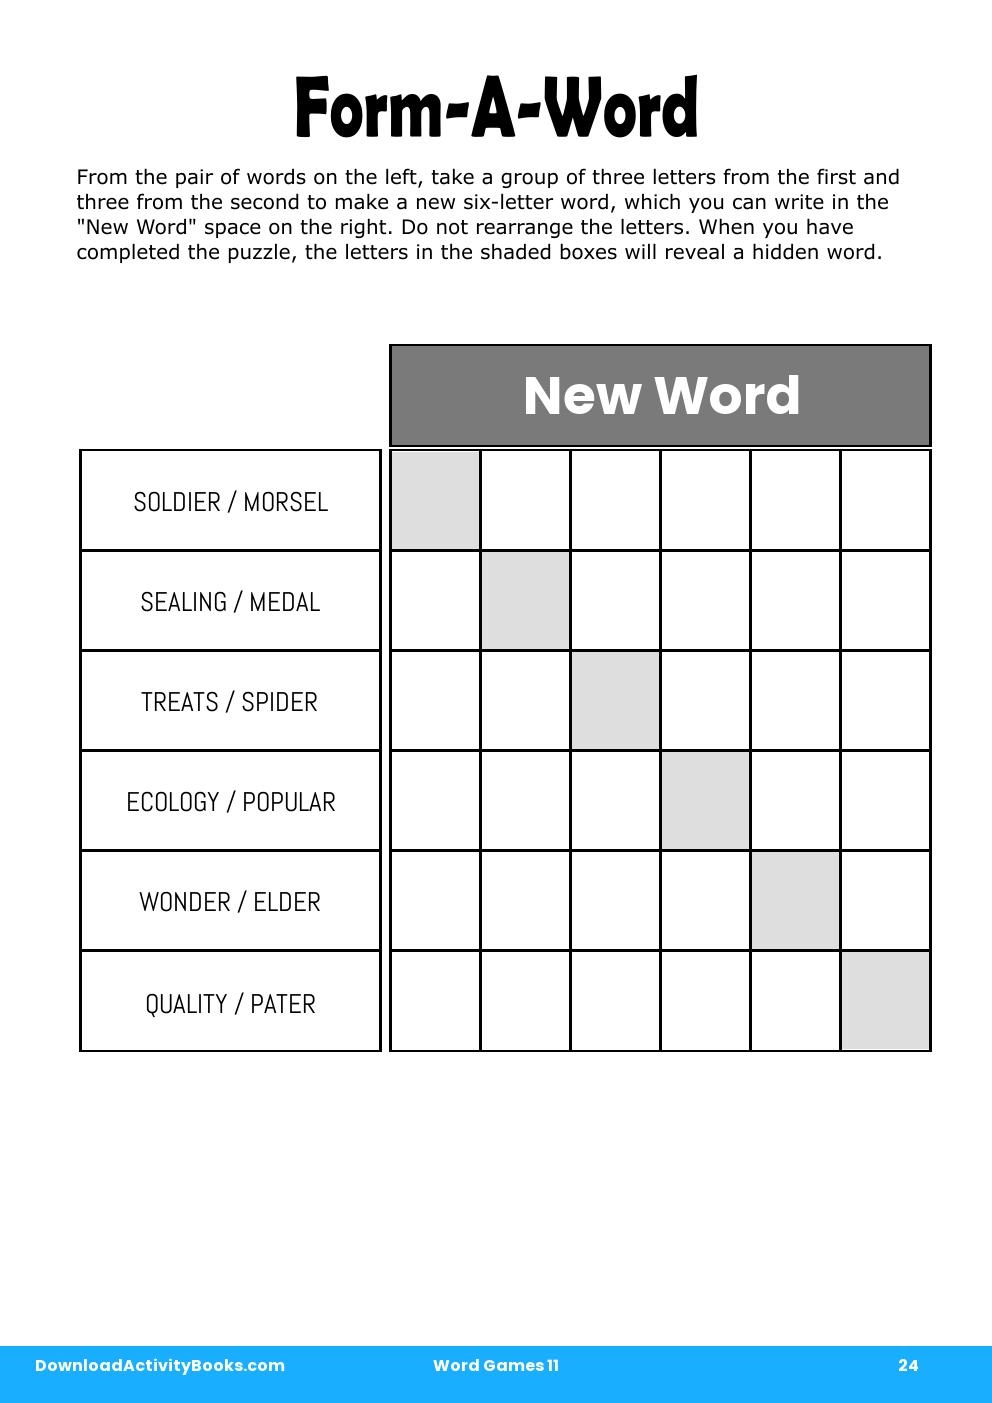 Form-A-Word in Word Games 11